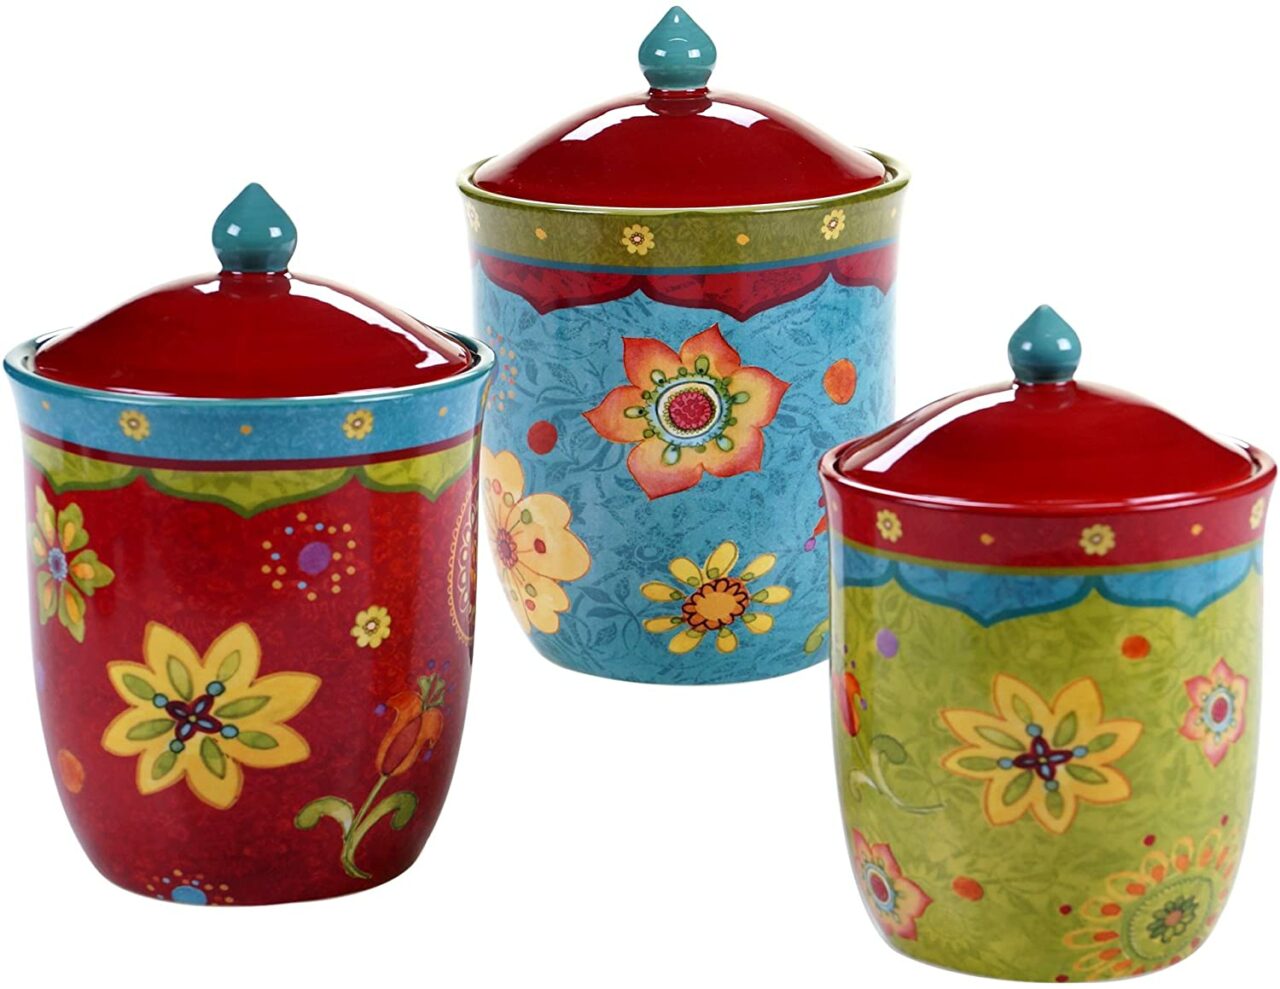 design ifeas for kitchen canisters